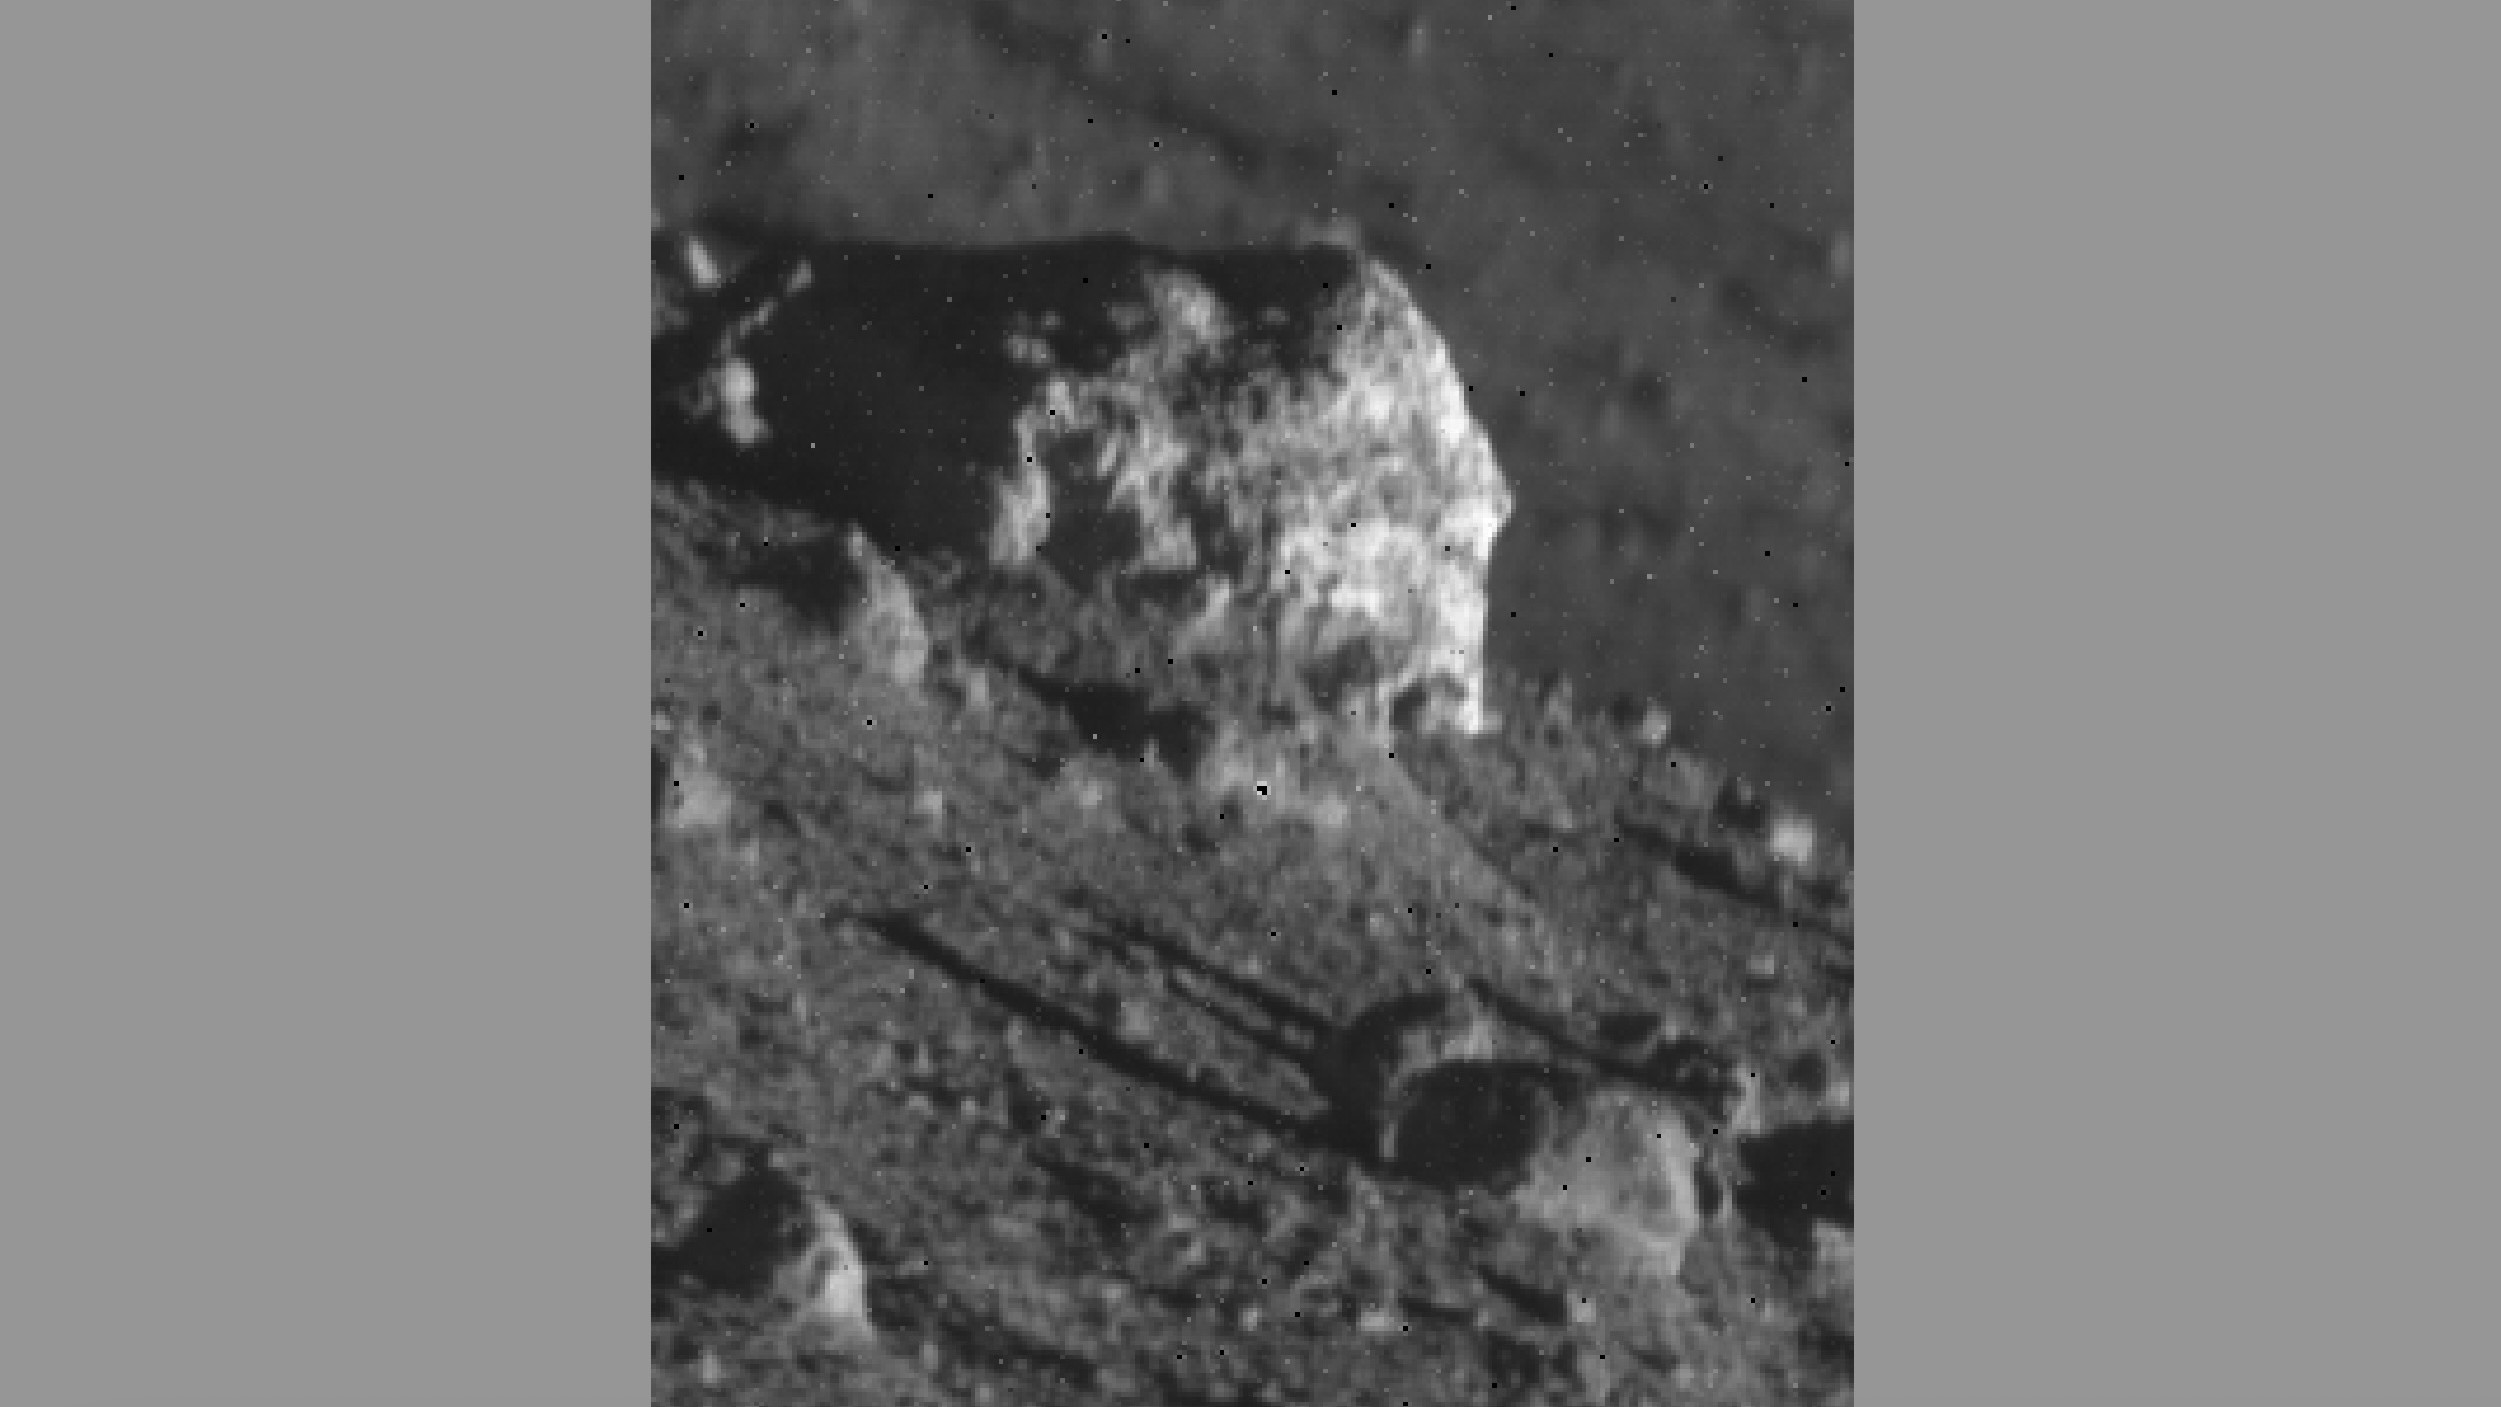 An enlarged view of a large rock and surrounding smaller rocks on the moon.